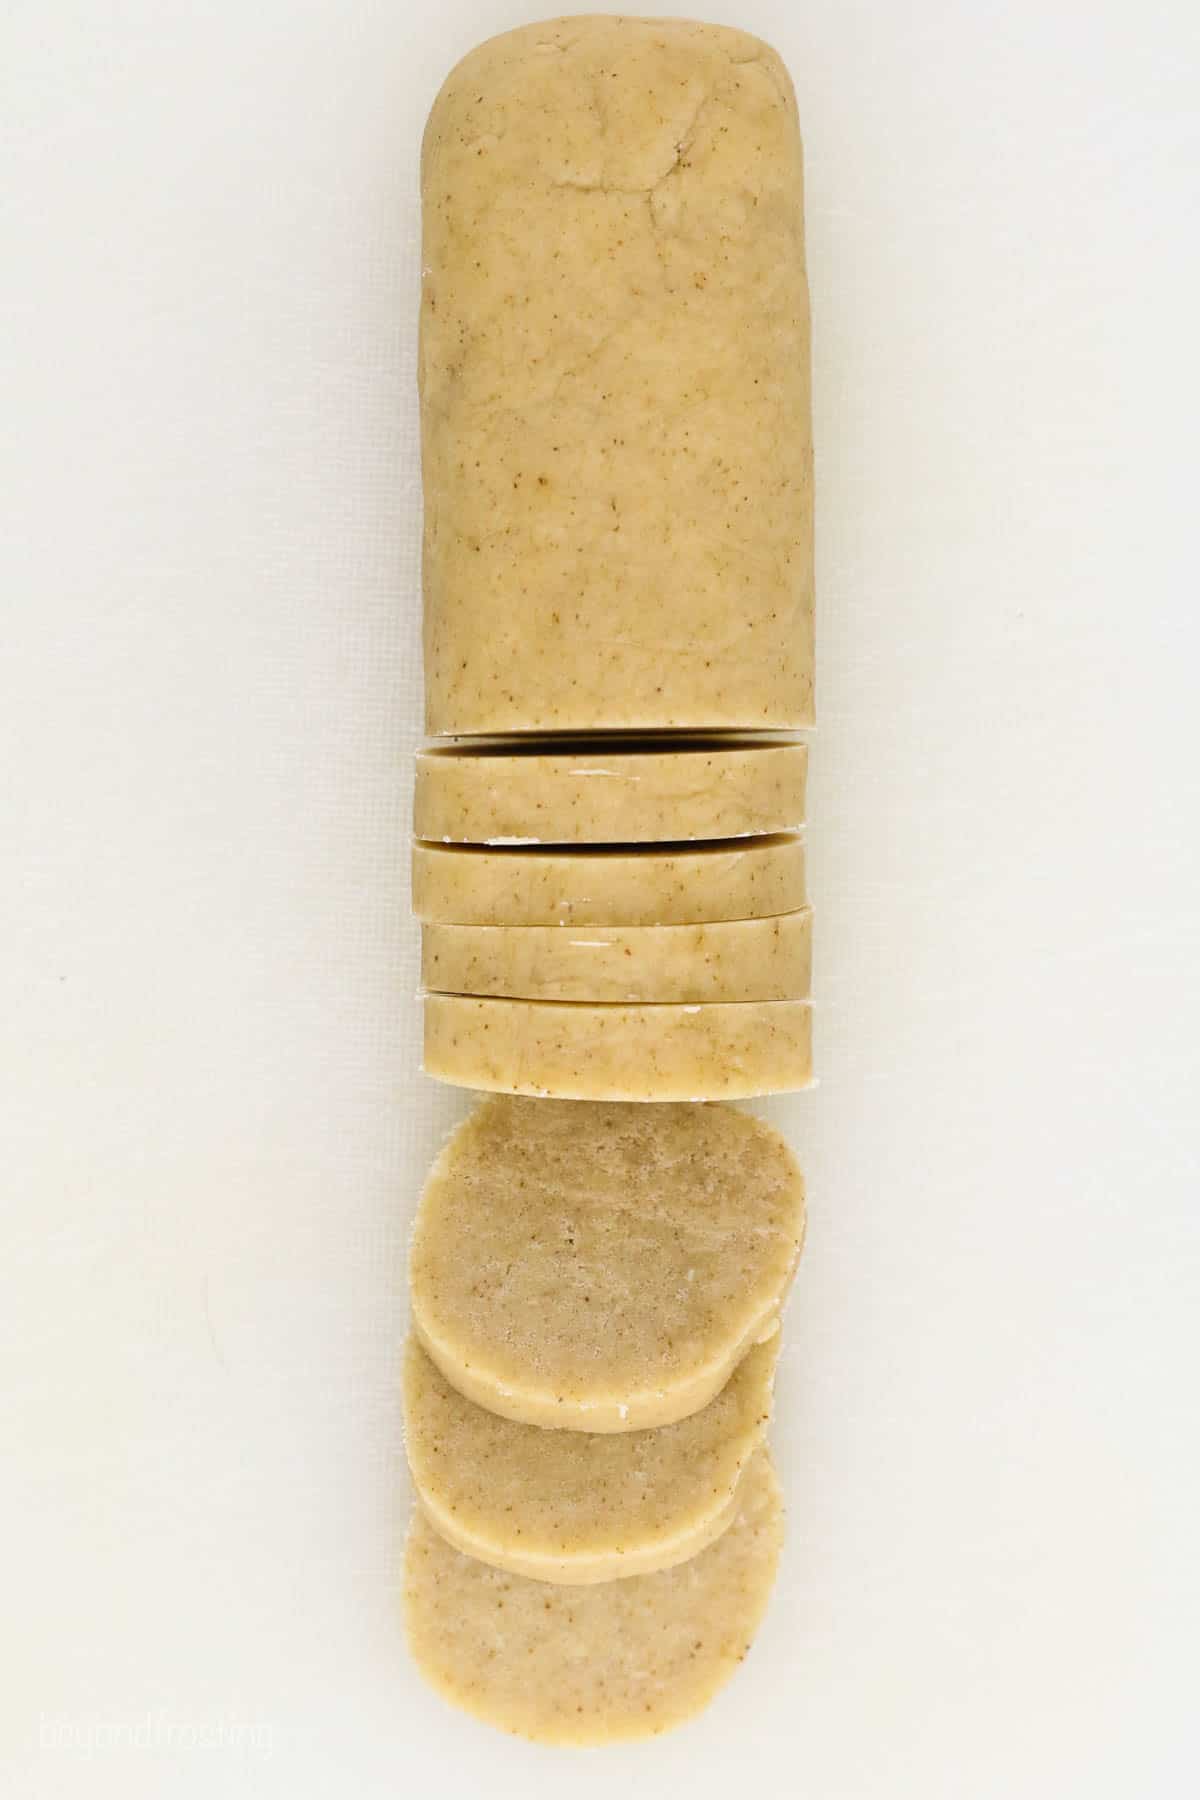 roll of shortbread cookie dough sliced